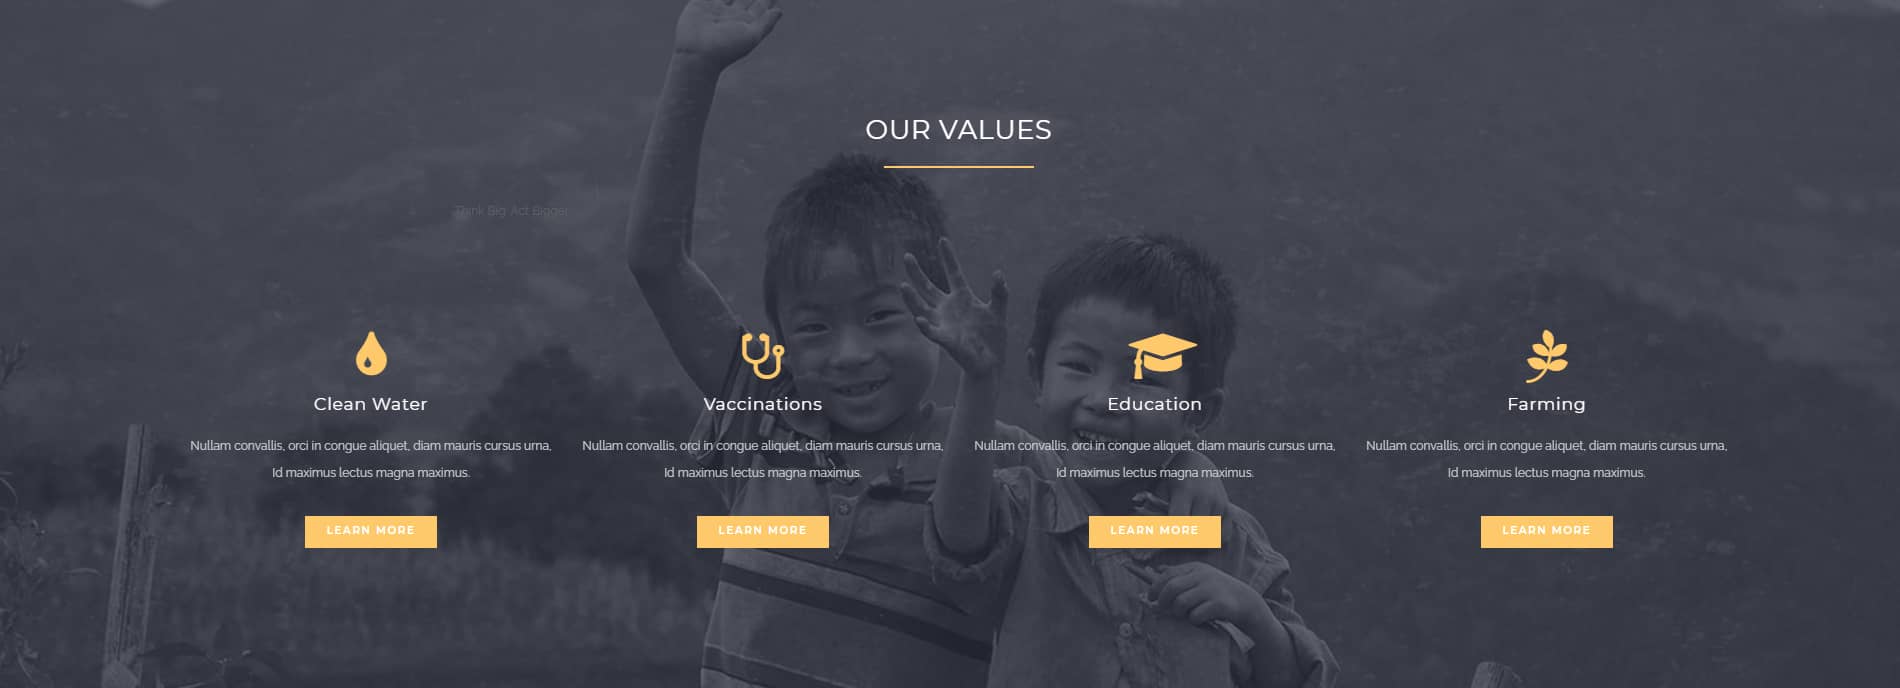 Avada Charity Our Values